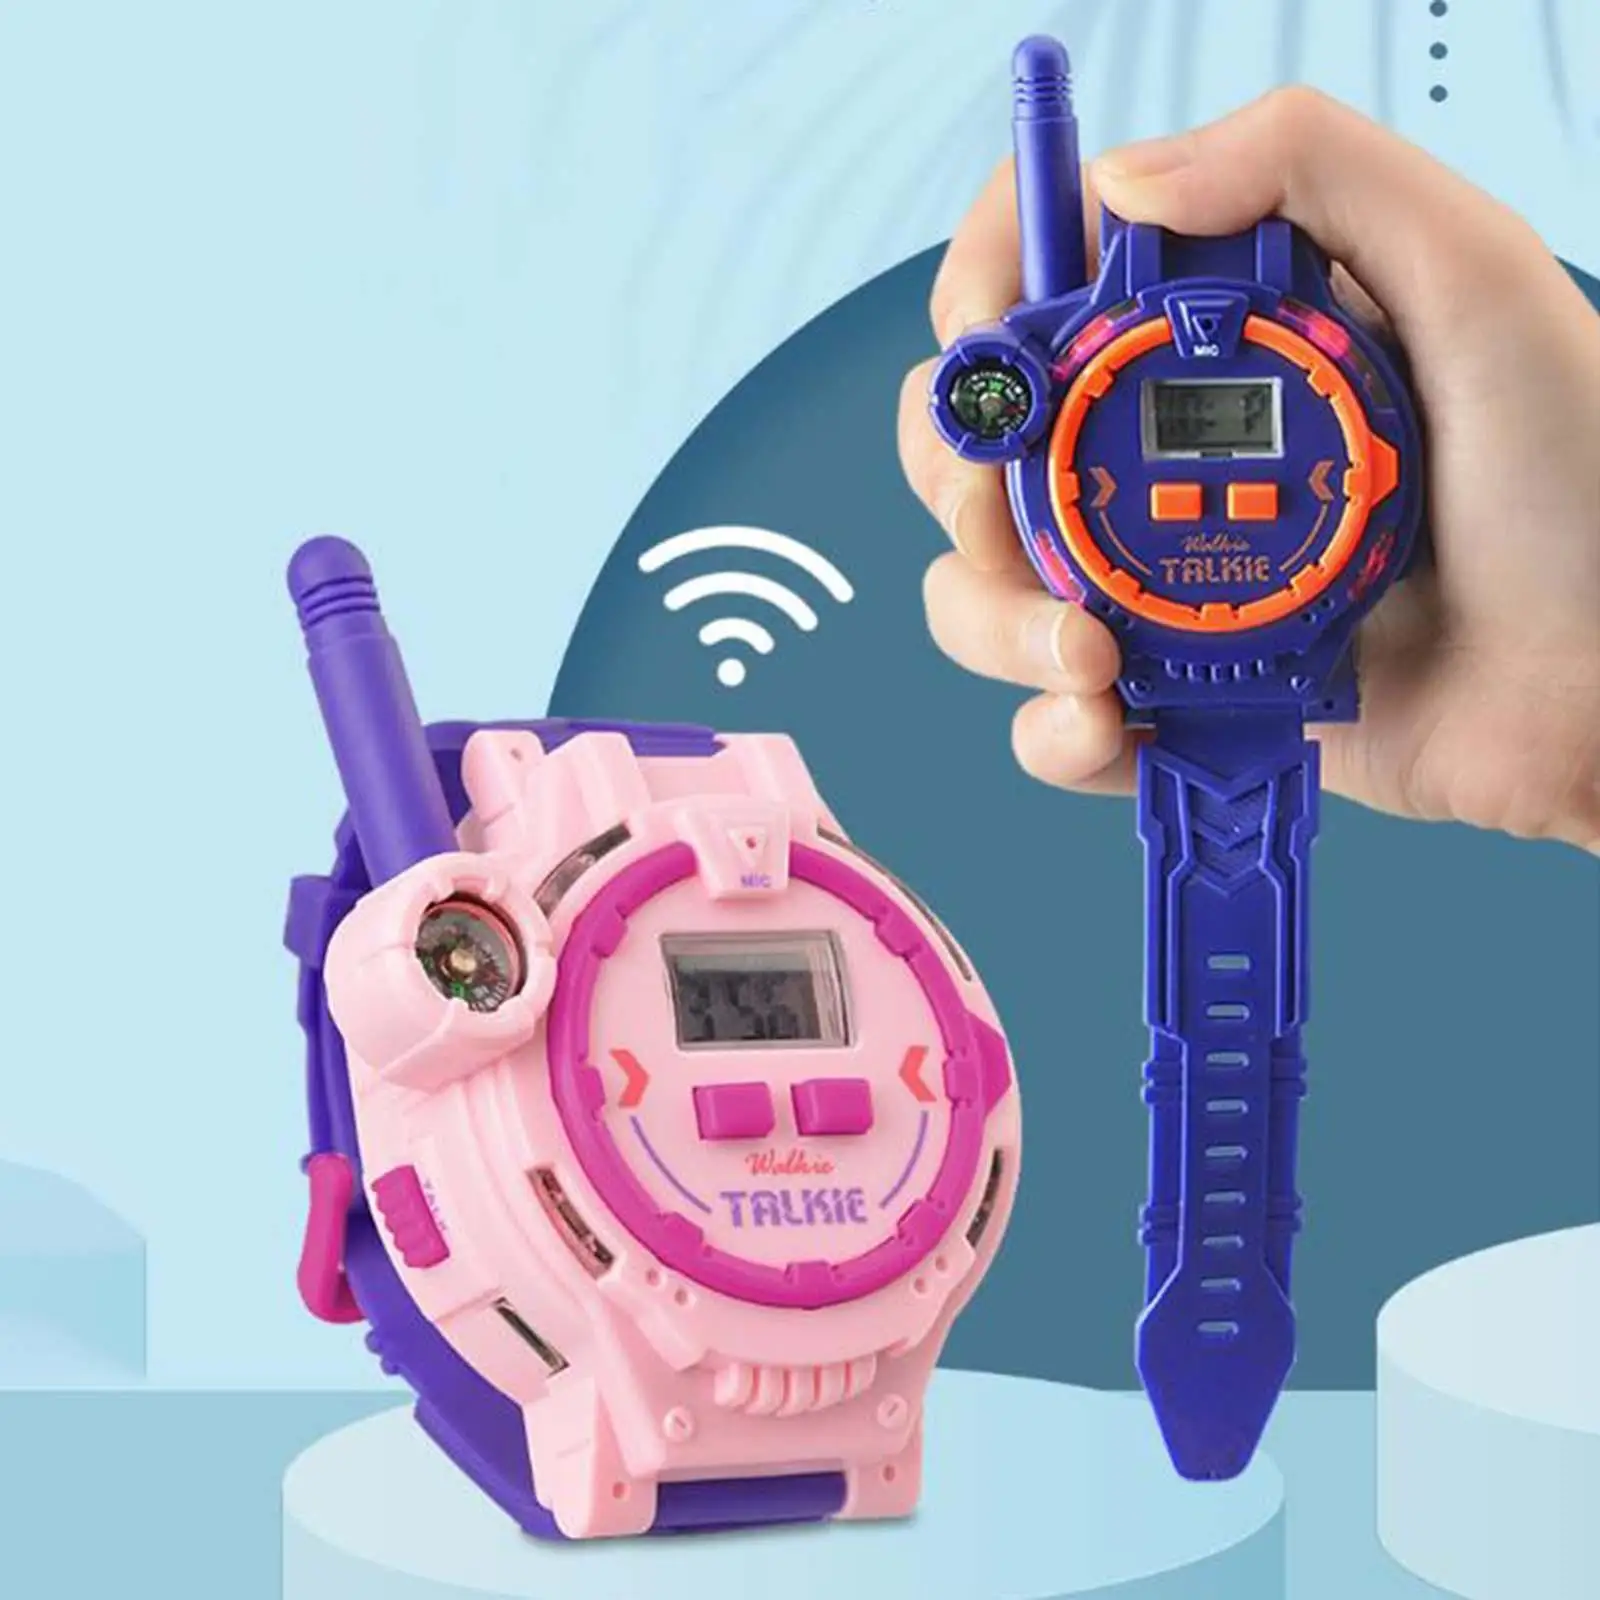  Radios Speaker Watch LED Lights Phone for 3 Ages Boys and Girls Toddler Educational Toys Birthday Gift